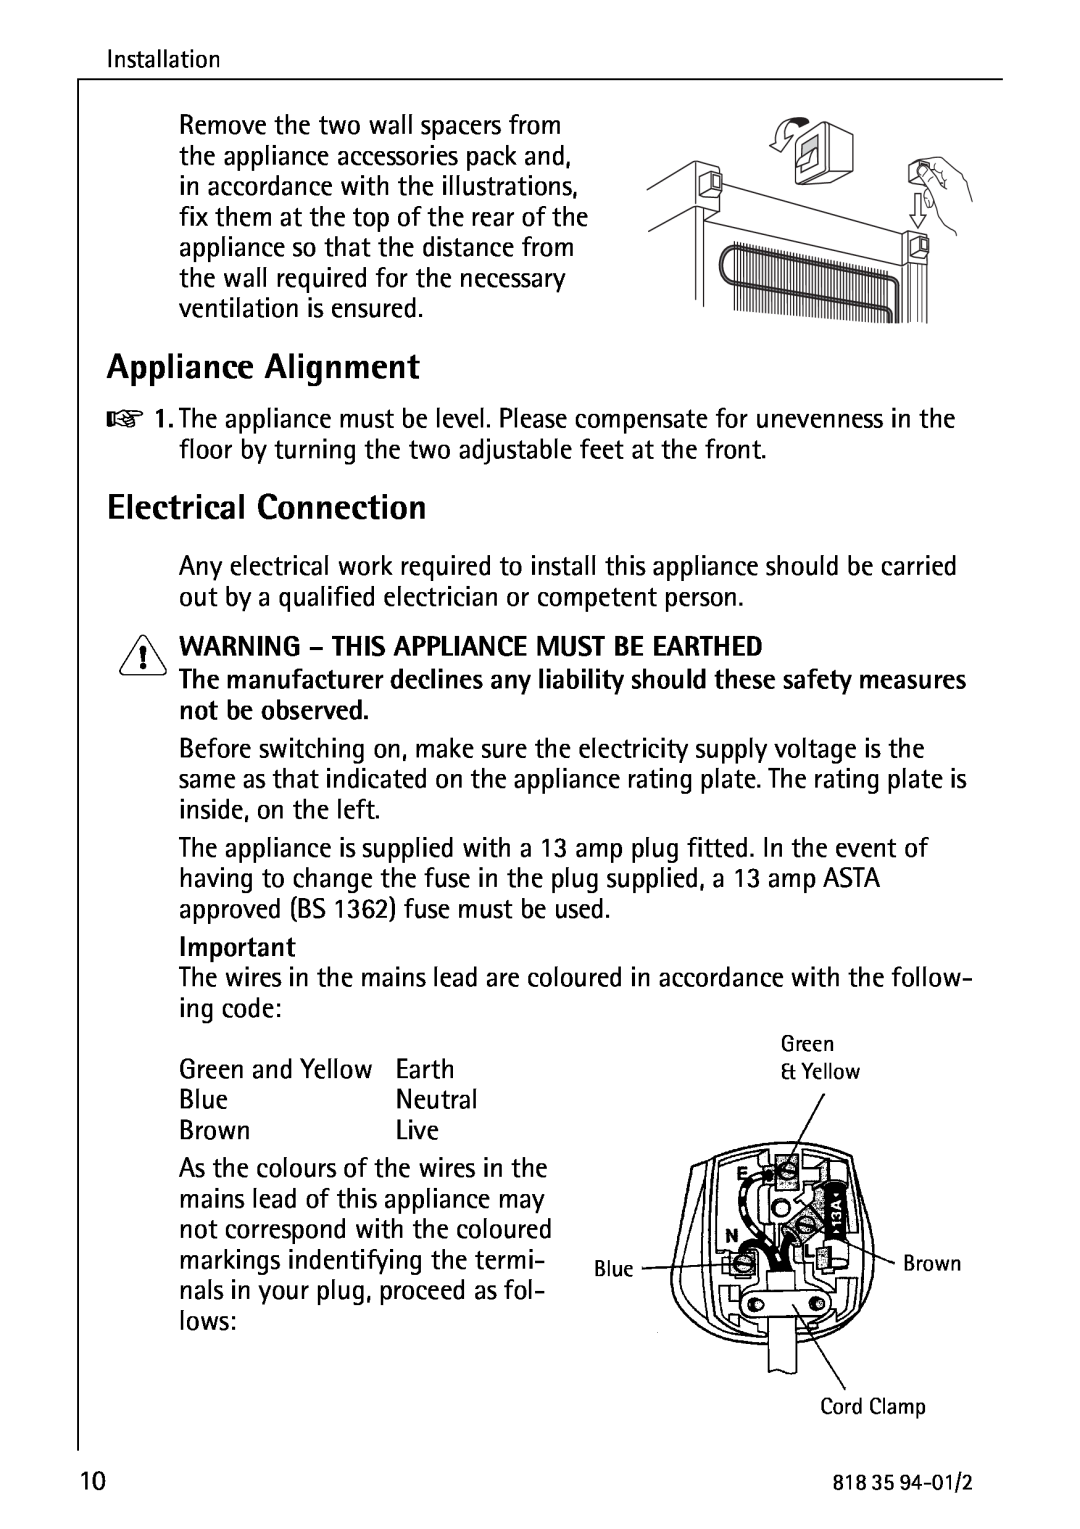 Electrolux U31462 Appliance Alignment, Electrical Connection, Warning - This Appliance Must Be Earthed 